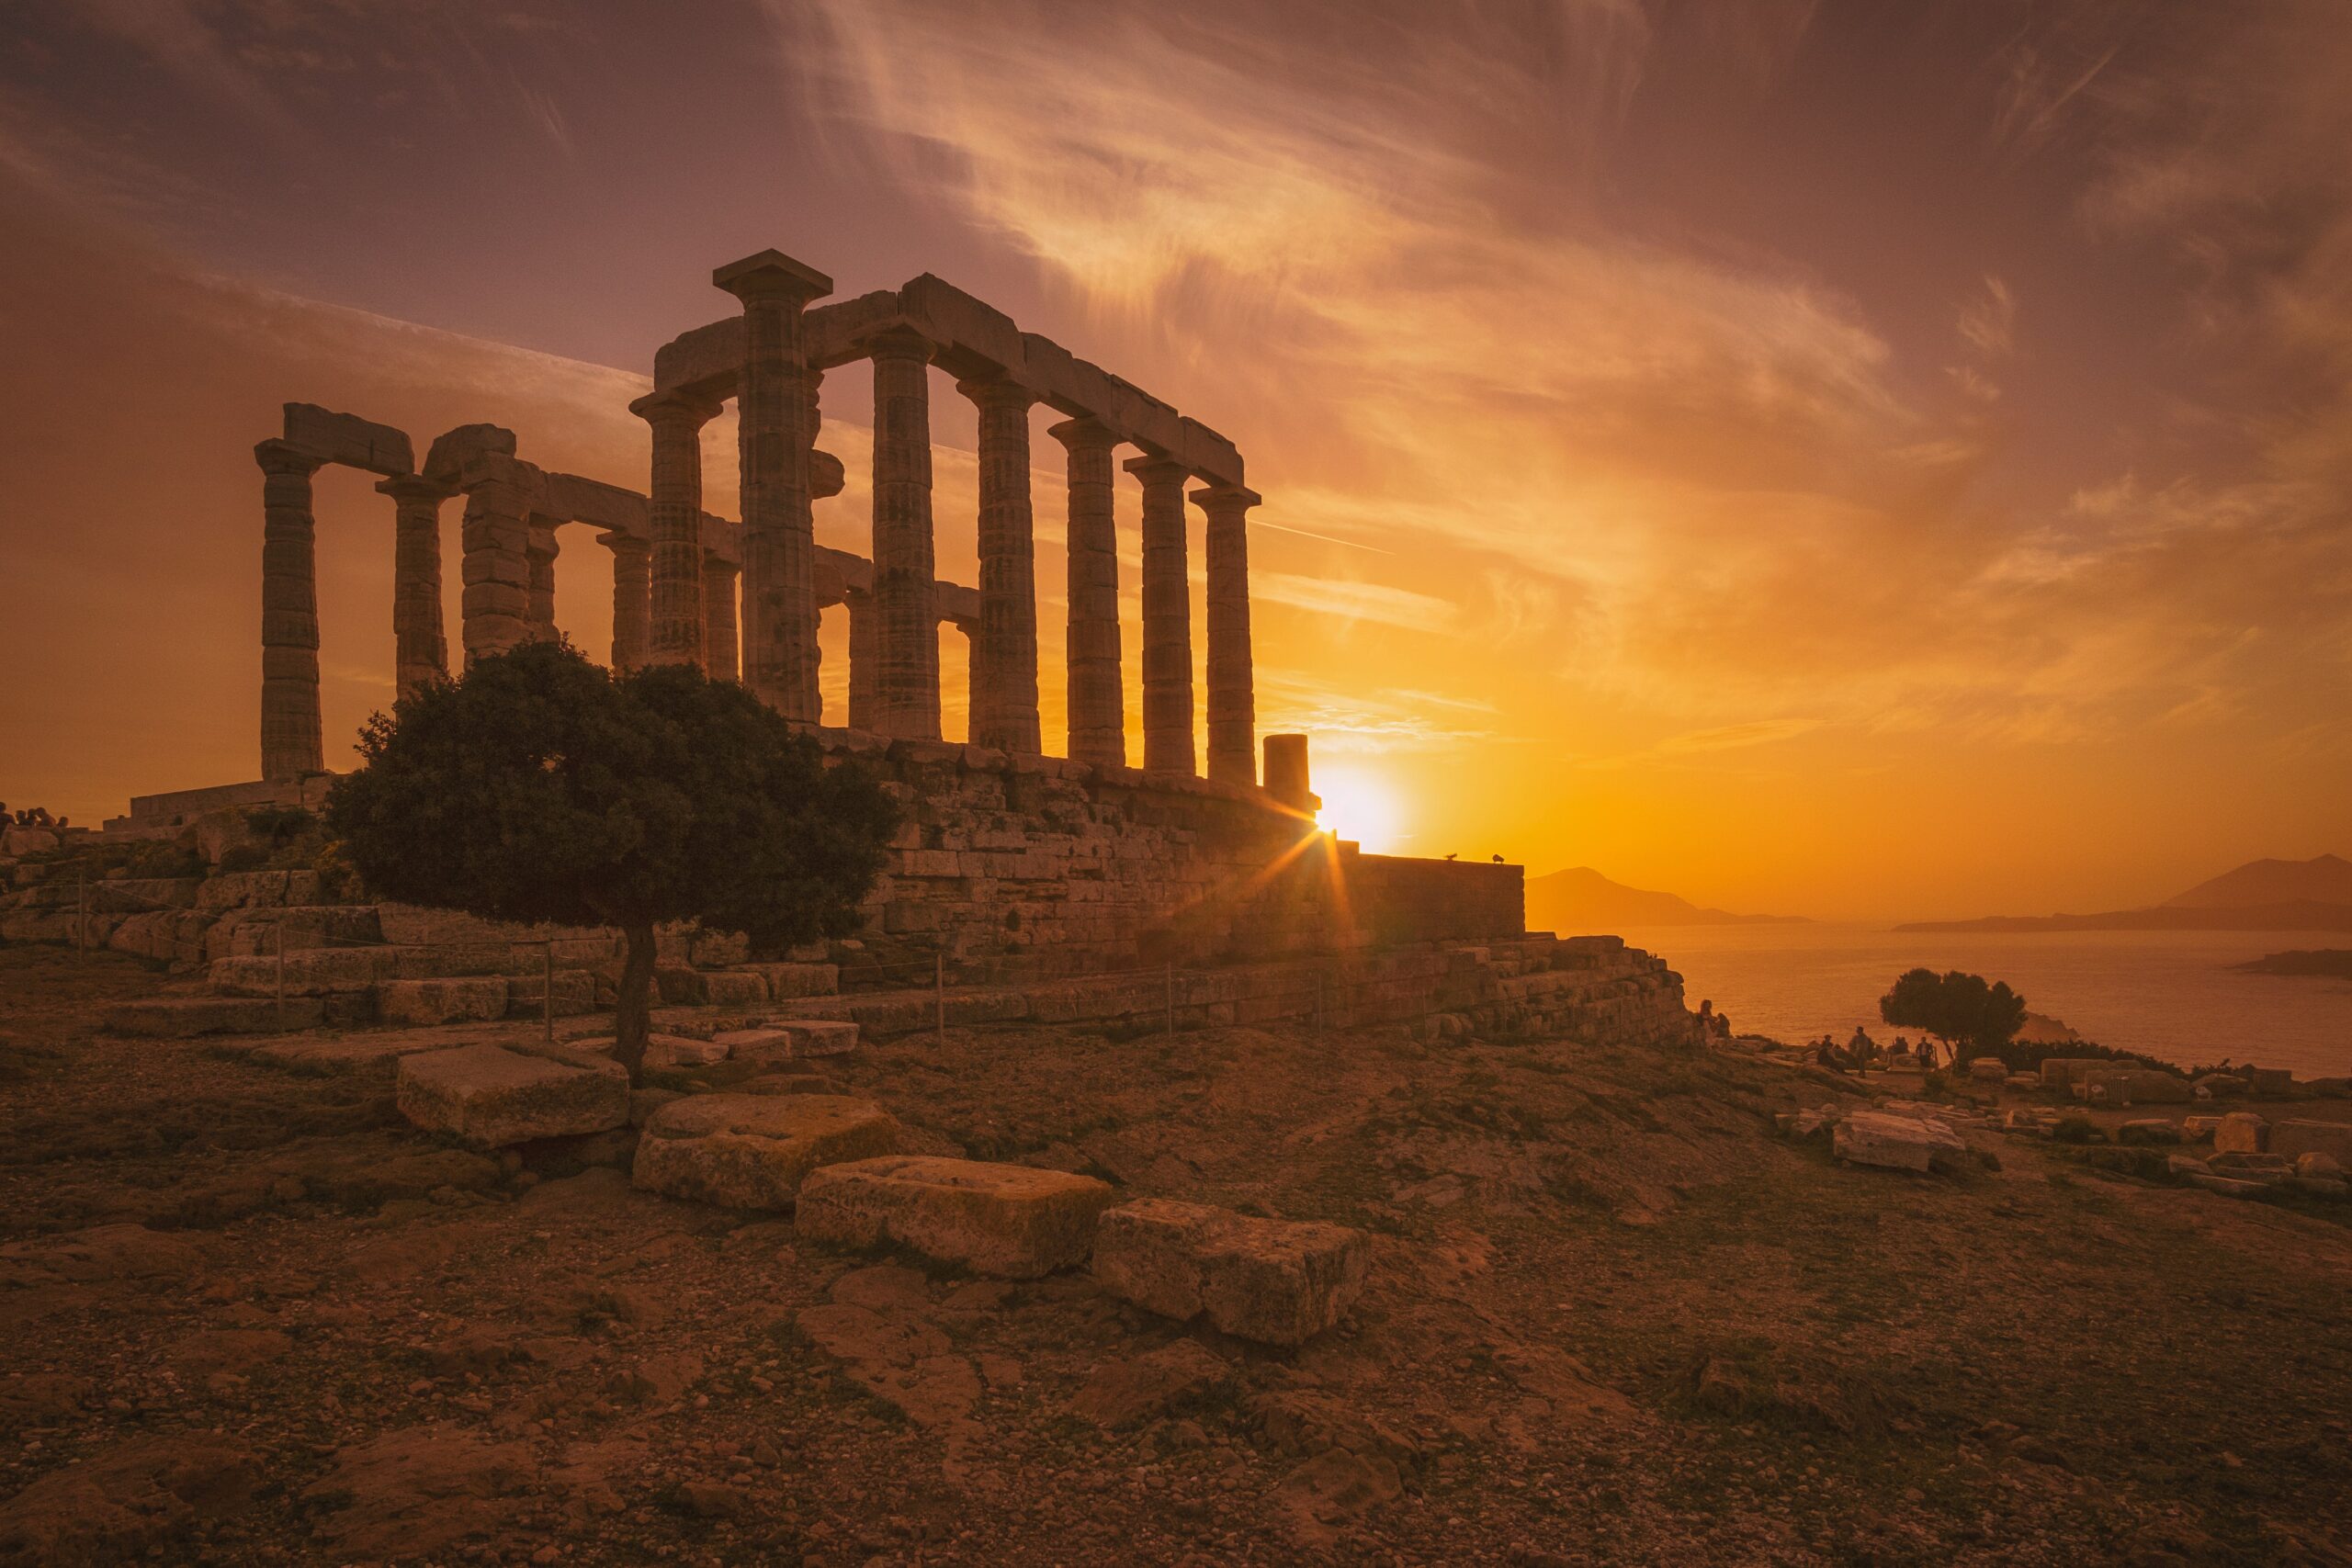 See The Sun Set Over The Temple Of Poseidon On Our 10 Day Athens, Santorini & Mykonos Package Tour